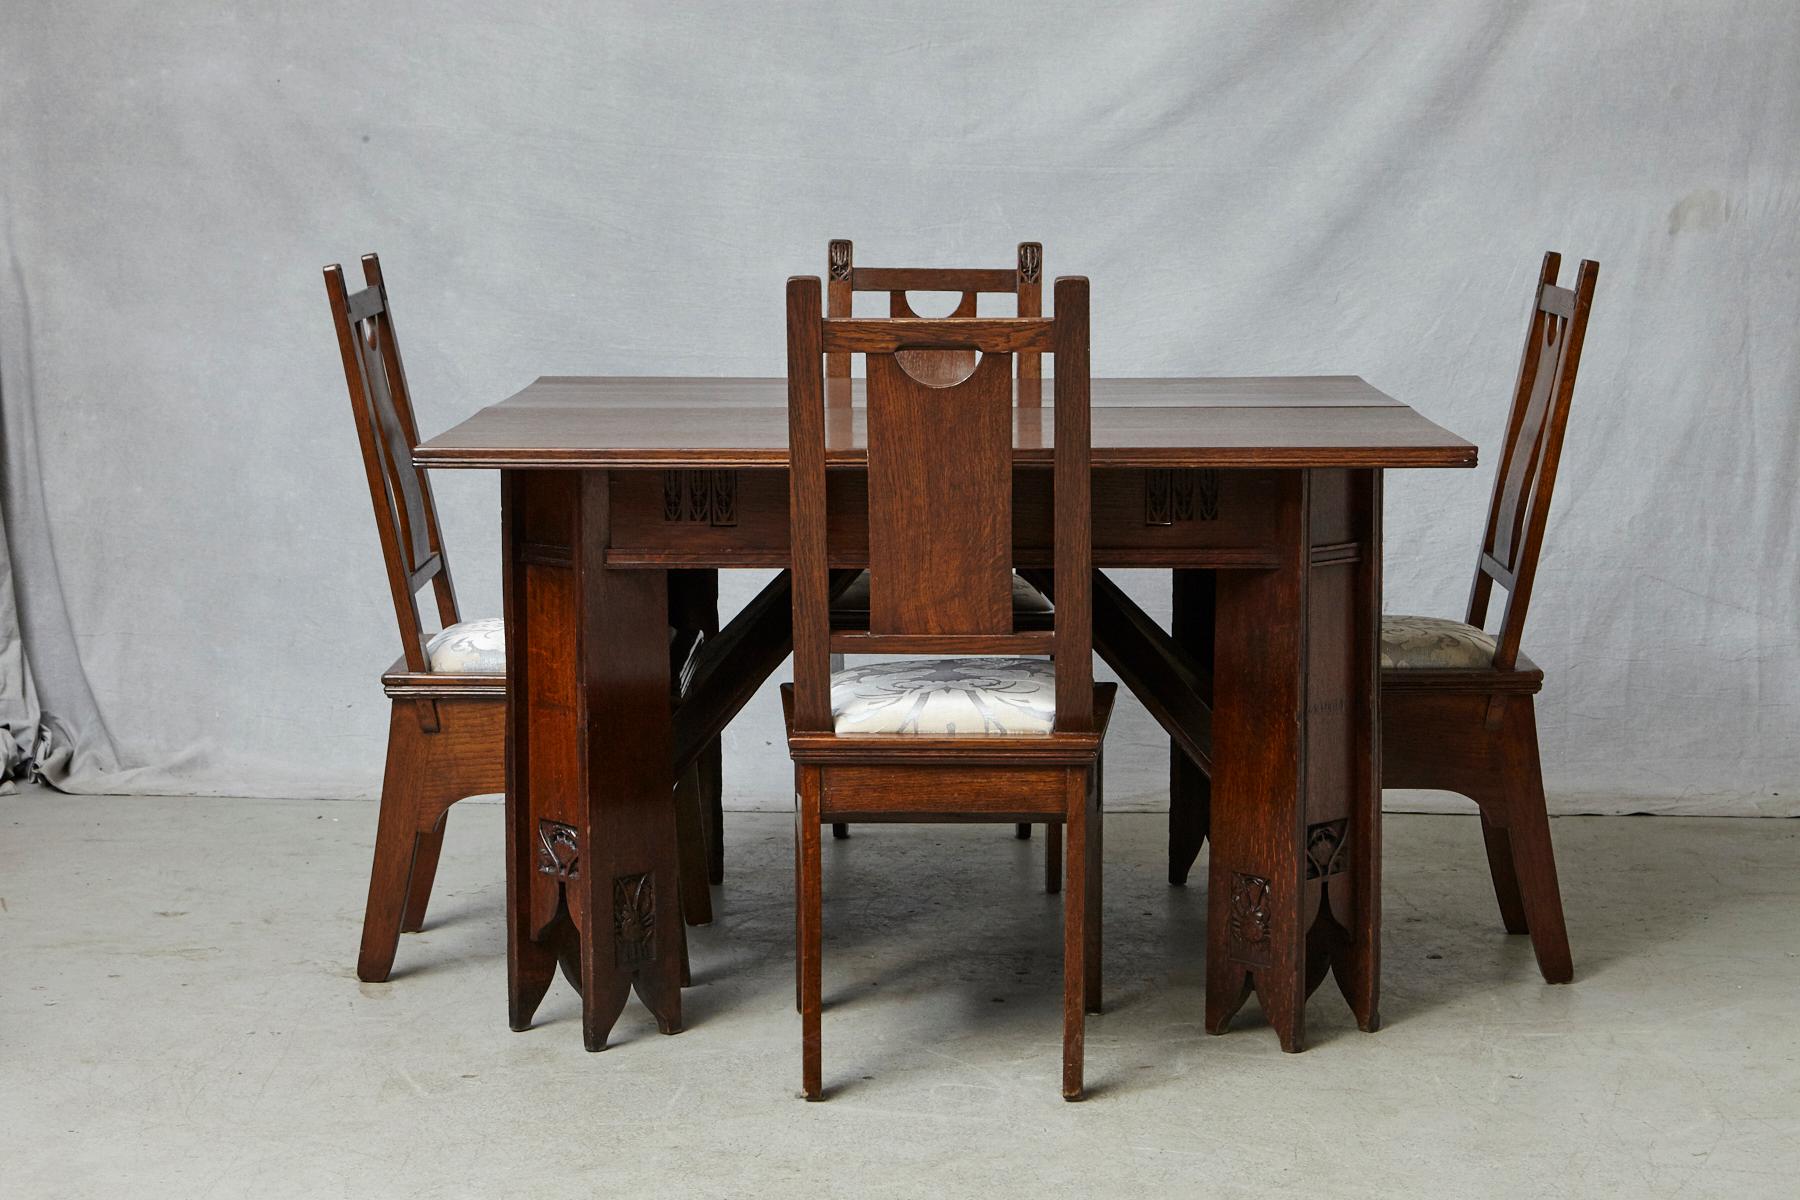 Italian Important Art Nouveau Dining Set by Ernesto Basile for Ducrot, circa 1900